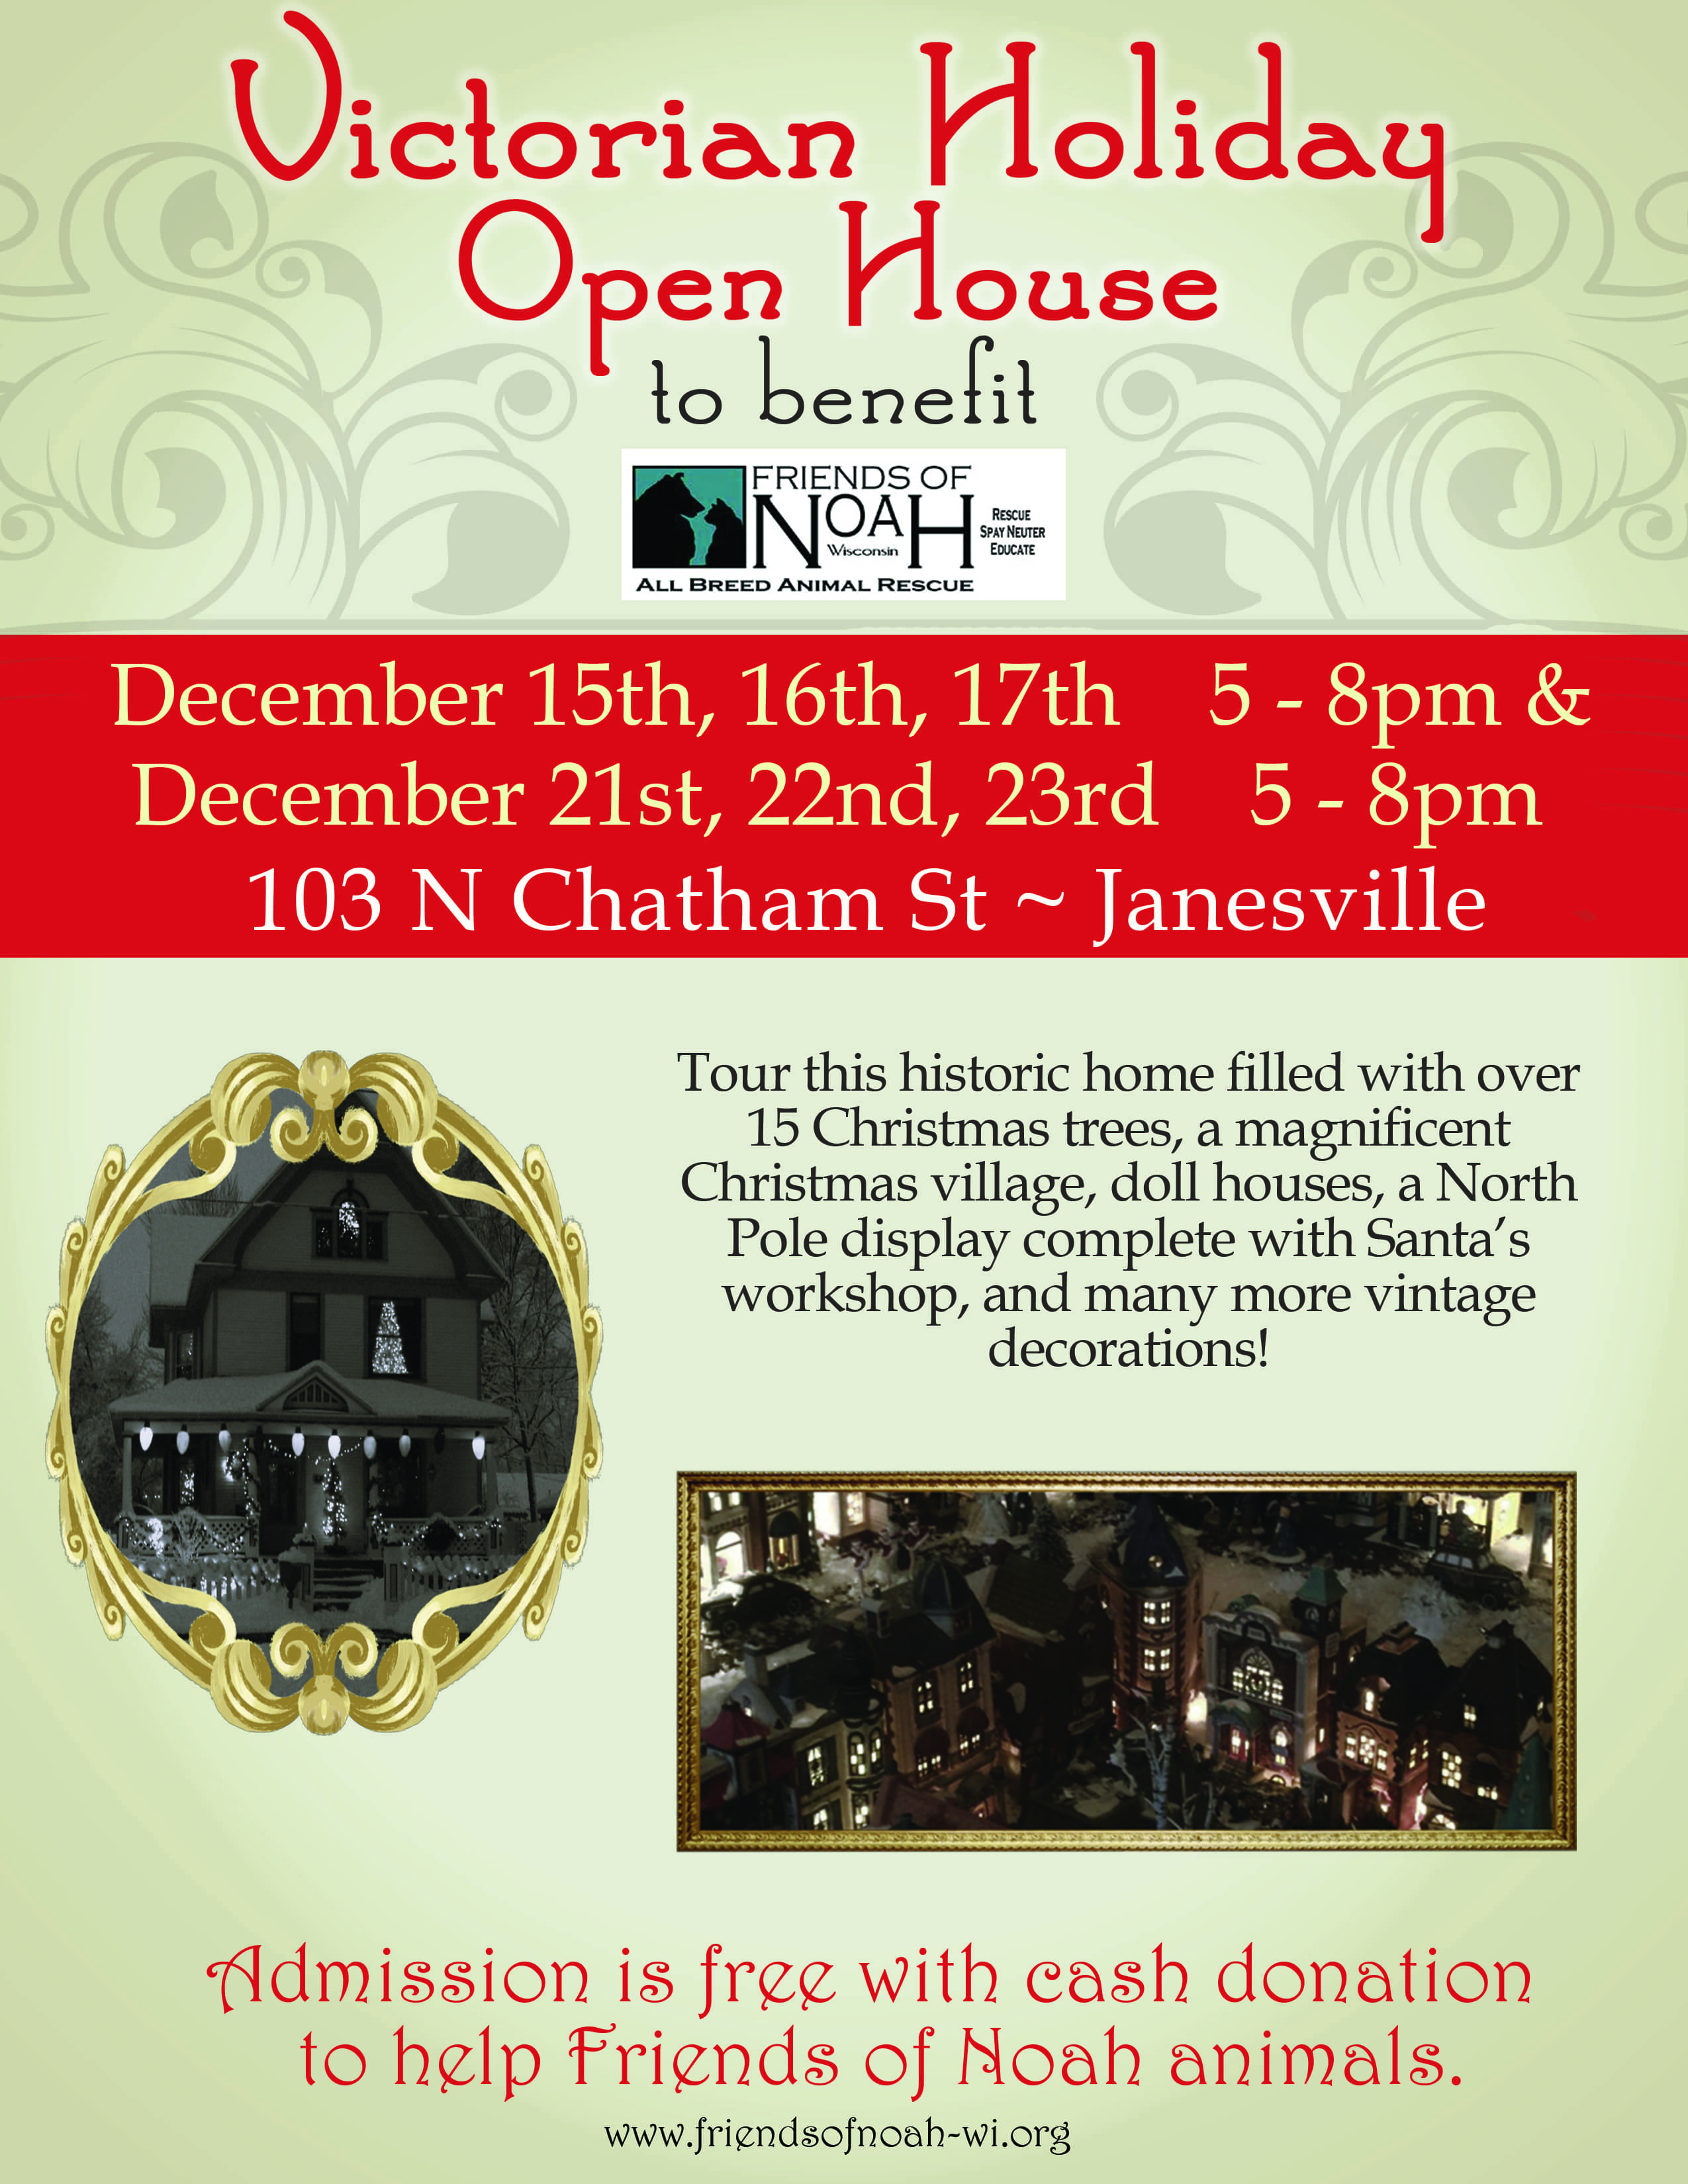 victorian-holiday-open-house-poster-copy1